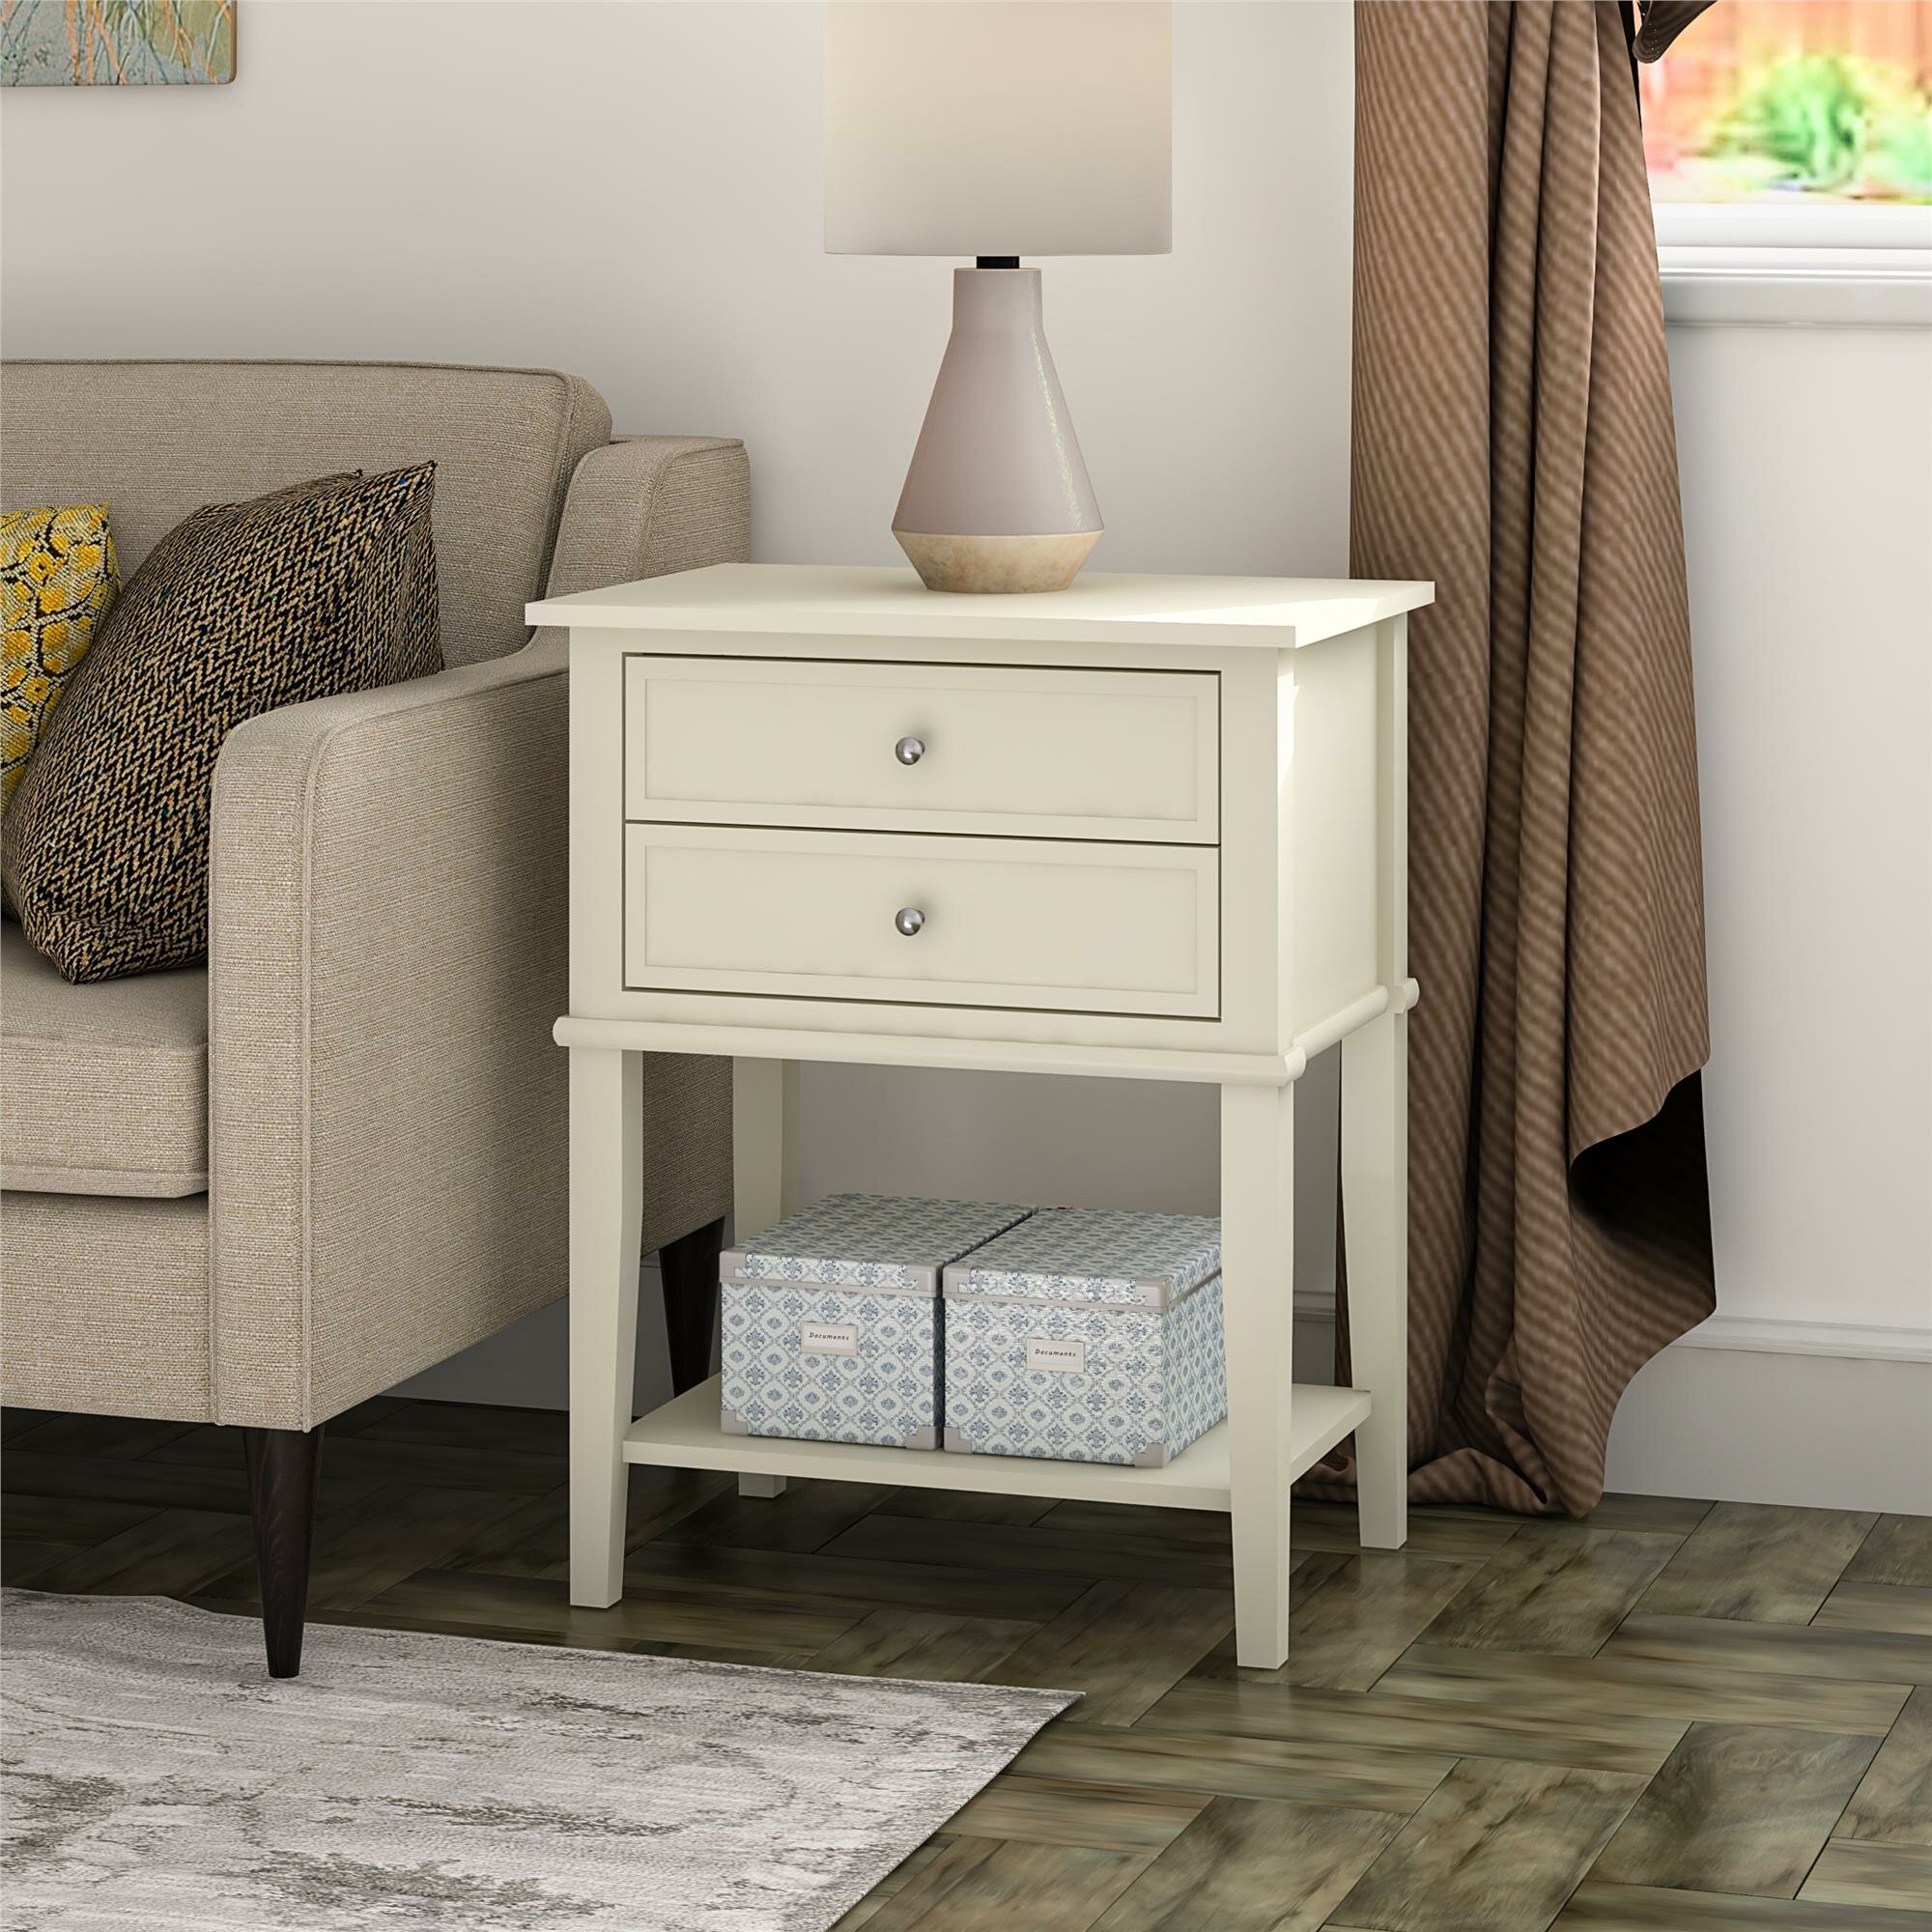  ZENODDLY Small Side Table with Drawer & 2 Shelves, 3 Tier Narrow  End Table with Storage, White End Tables for Living Room with Storage,  Elegant Wood Side Tables Living Room Table 